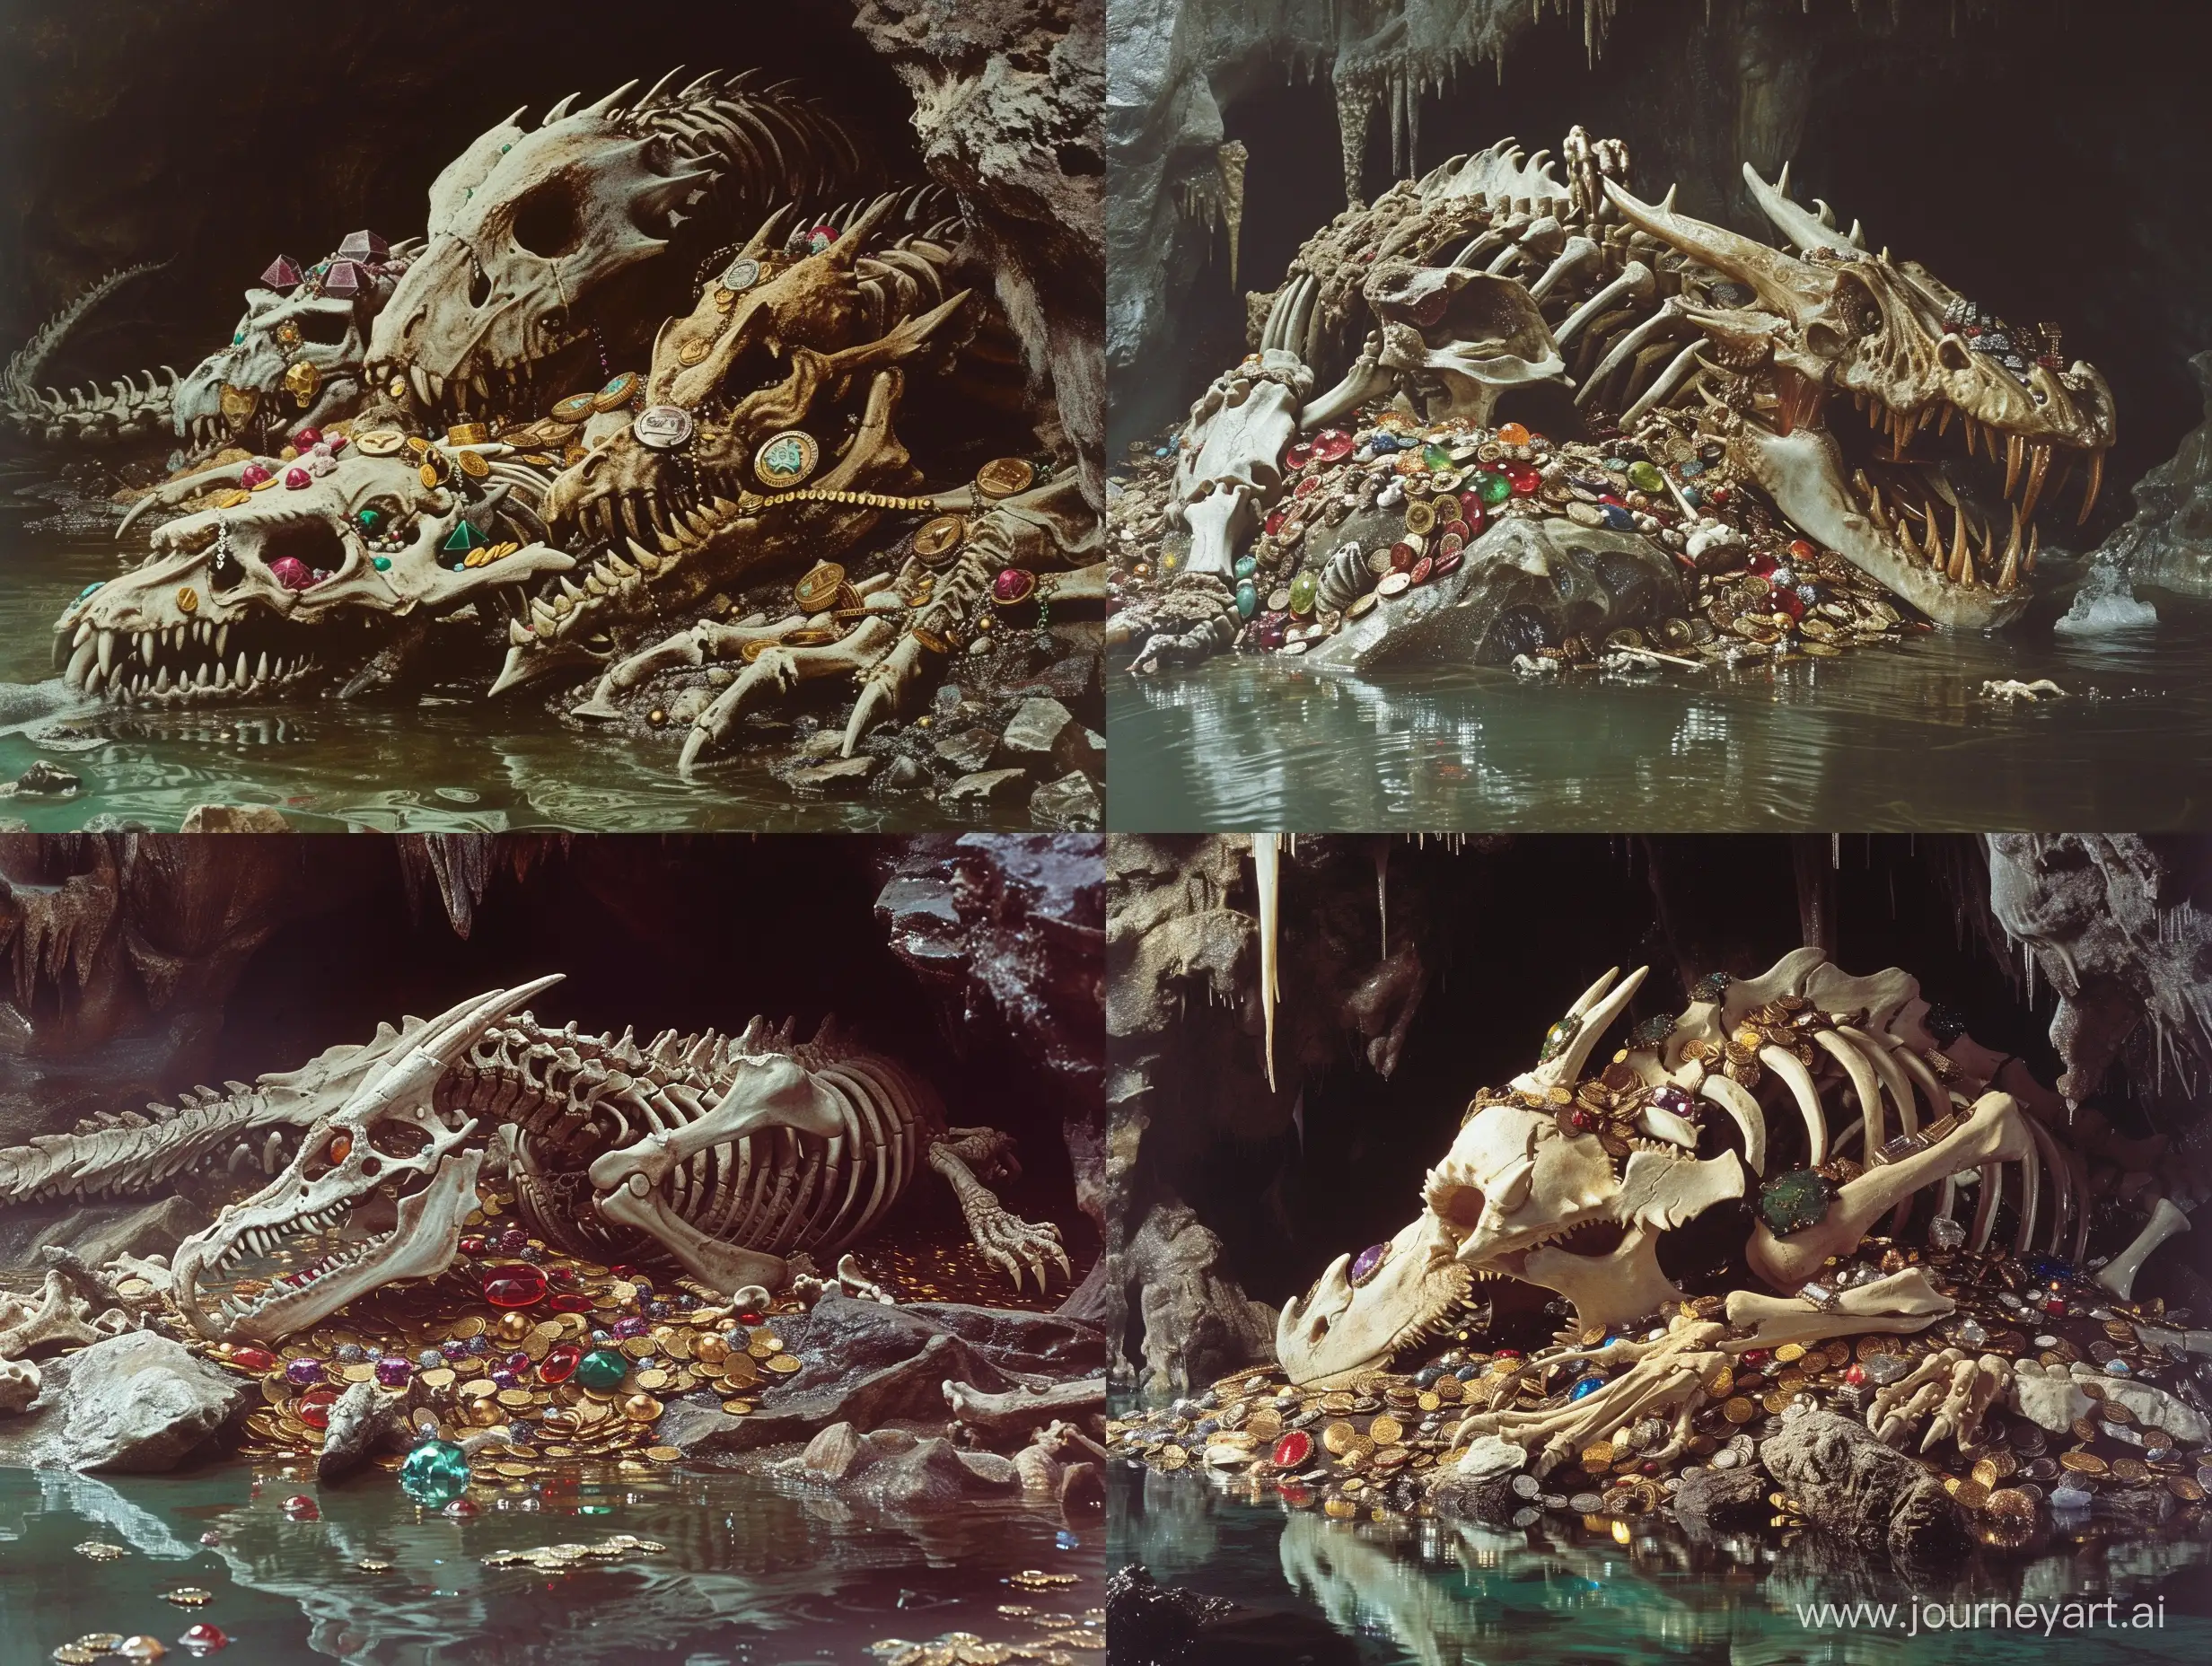 dvd screenengrabs character/arx fatalis a massive pile of dragon and human bones with gems and coins in a dark watery underground crypt dark fantasy 1980 style